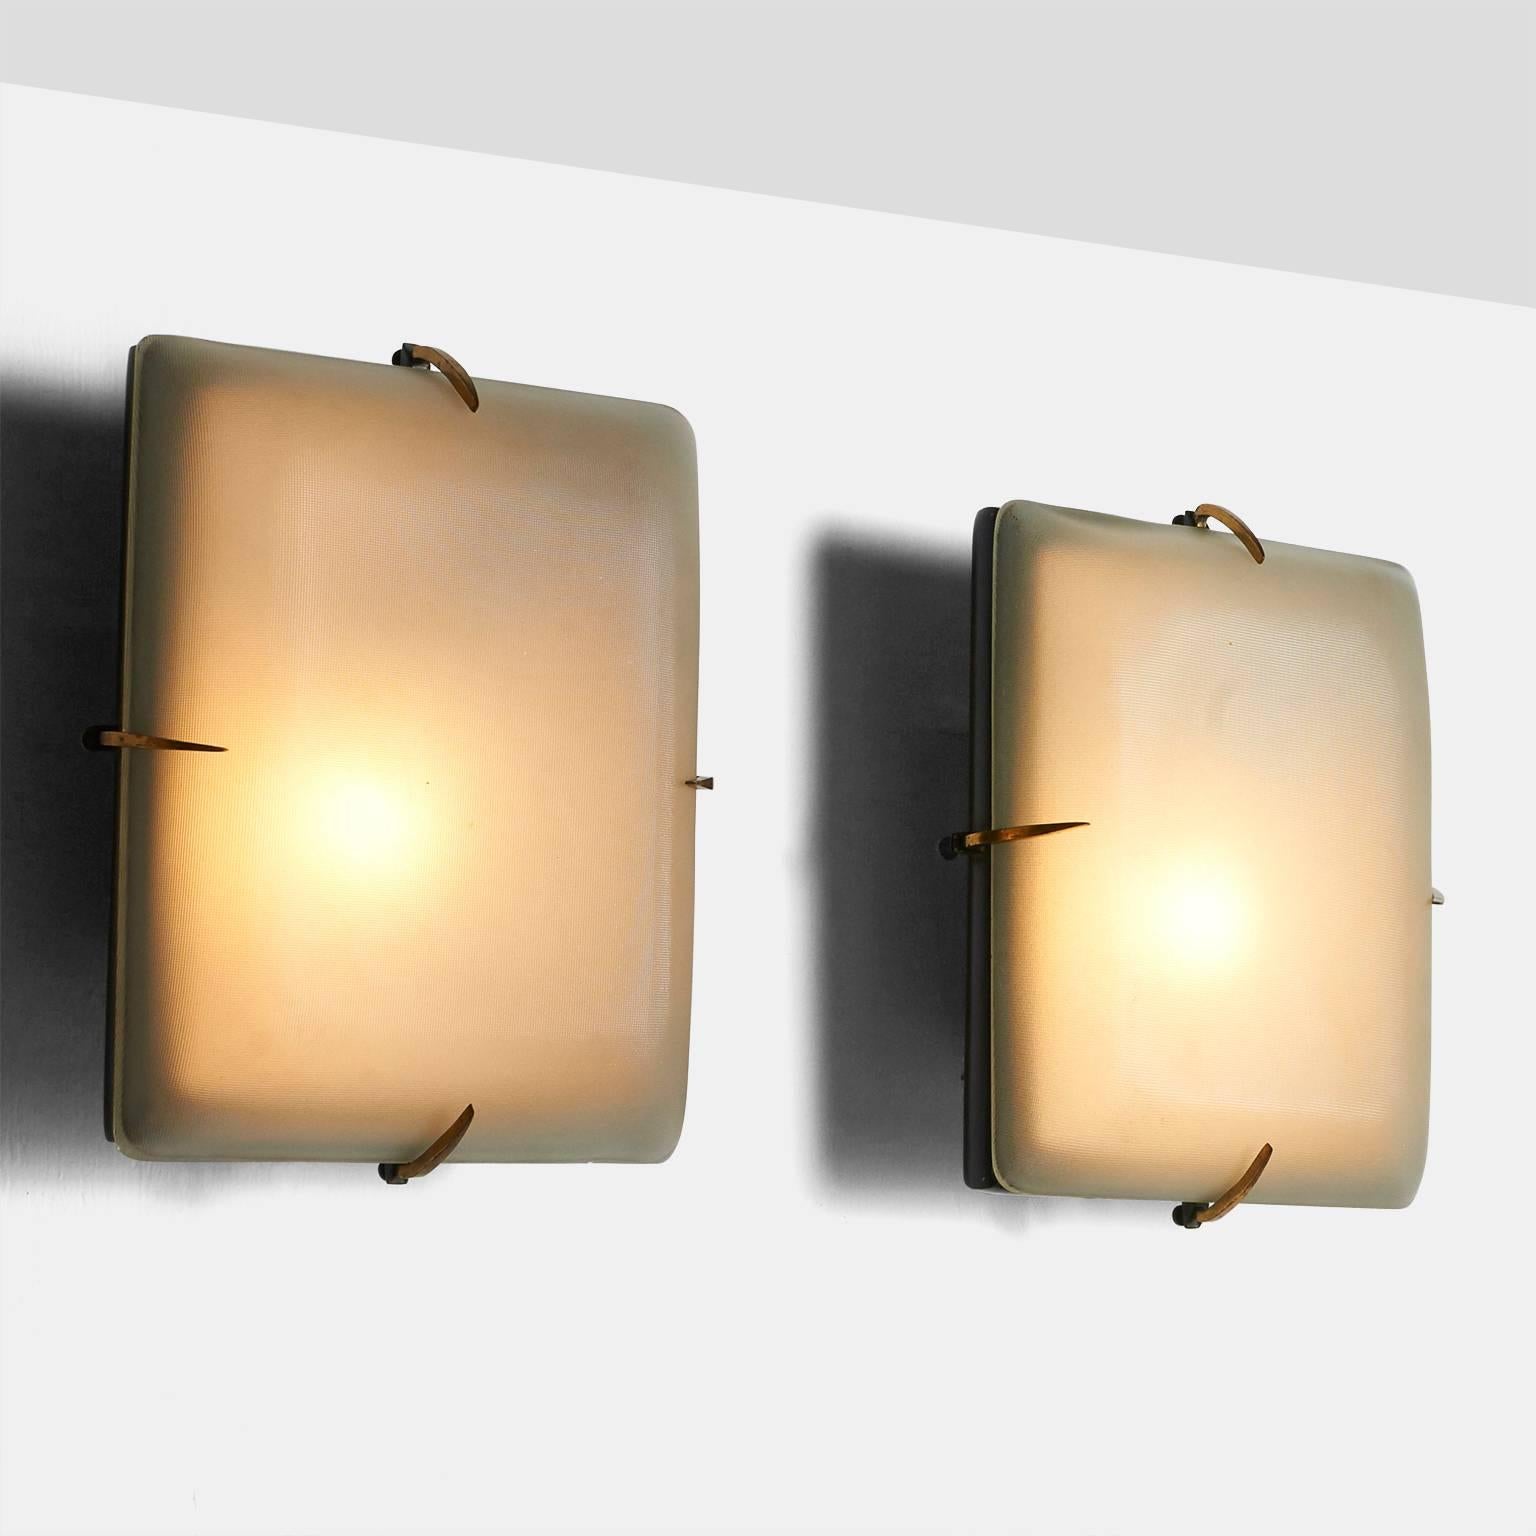 A pair of wall sconces with a black lacquered metal frame with brass trim and brass clamps that attach the textured glass shade to the frame. One Edison base socket. Made in Italy, circa 1950s.